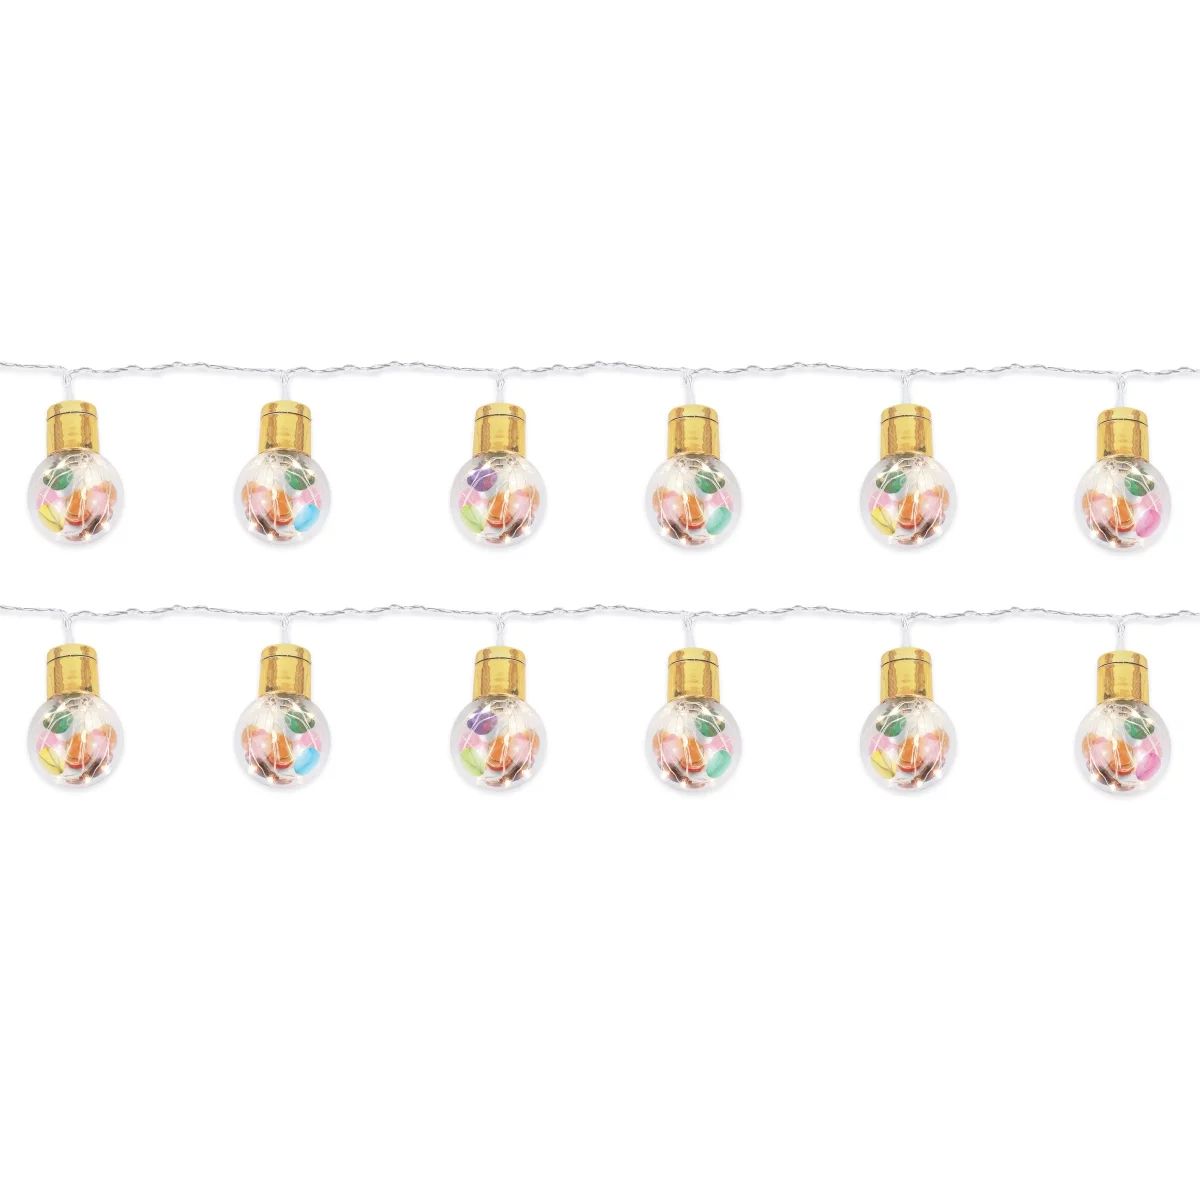 Packed Party "Confetti Party" Gold Indoor Outdoor LED String Lights, Battery Powered | Walmart (US)